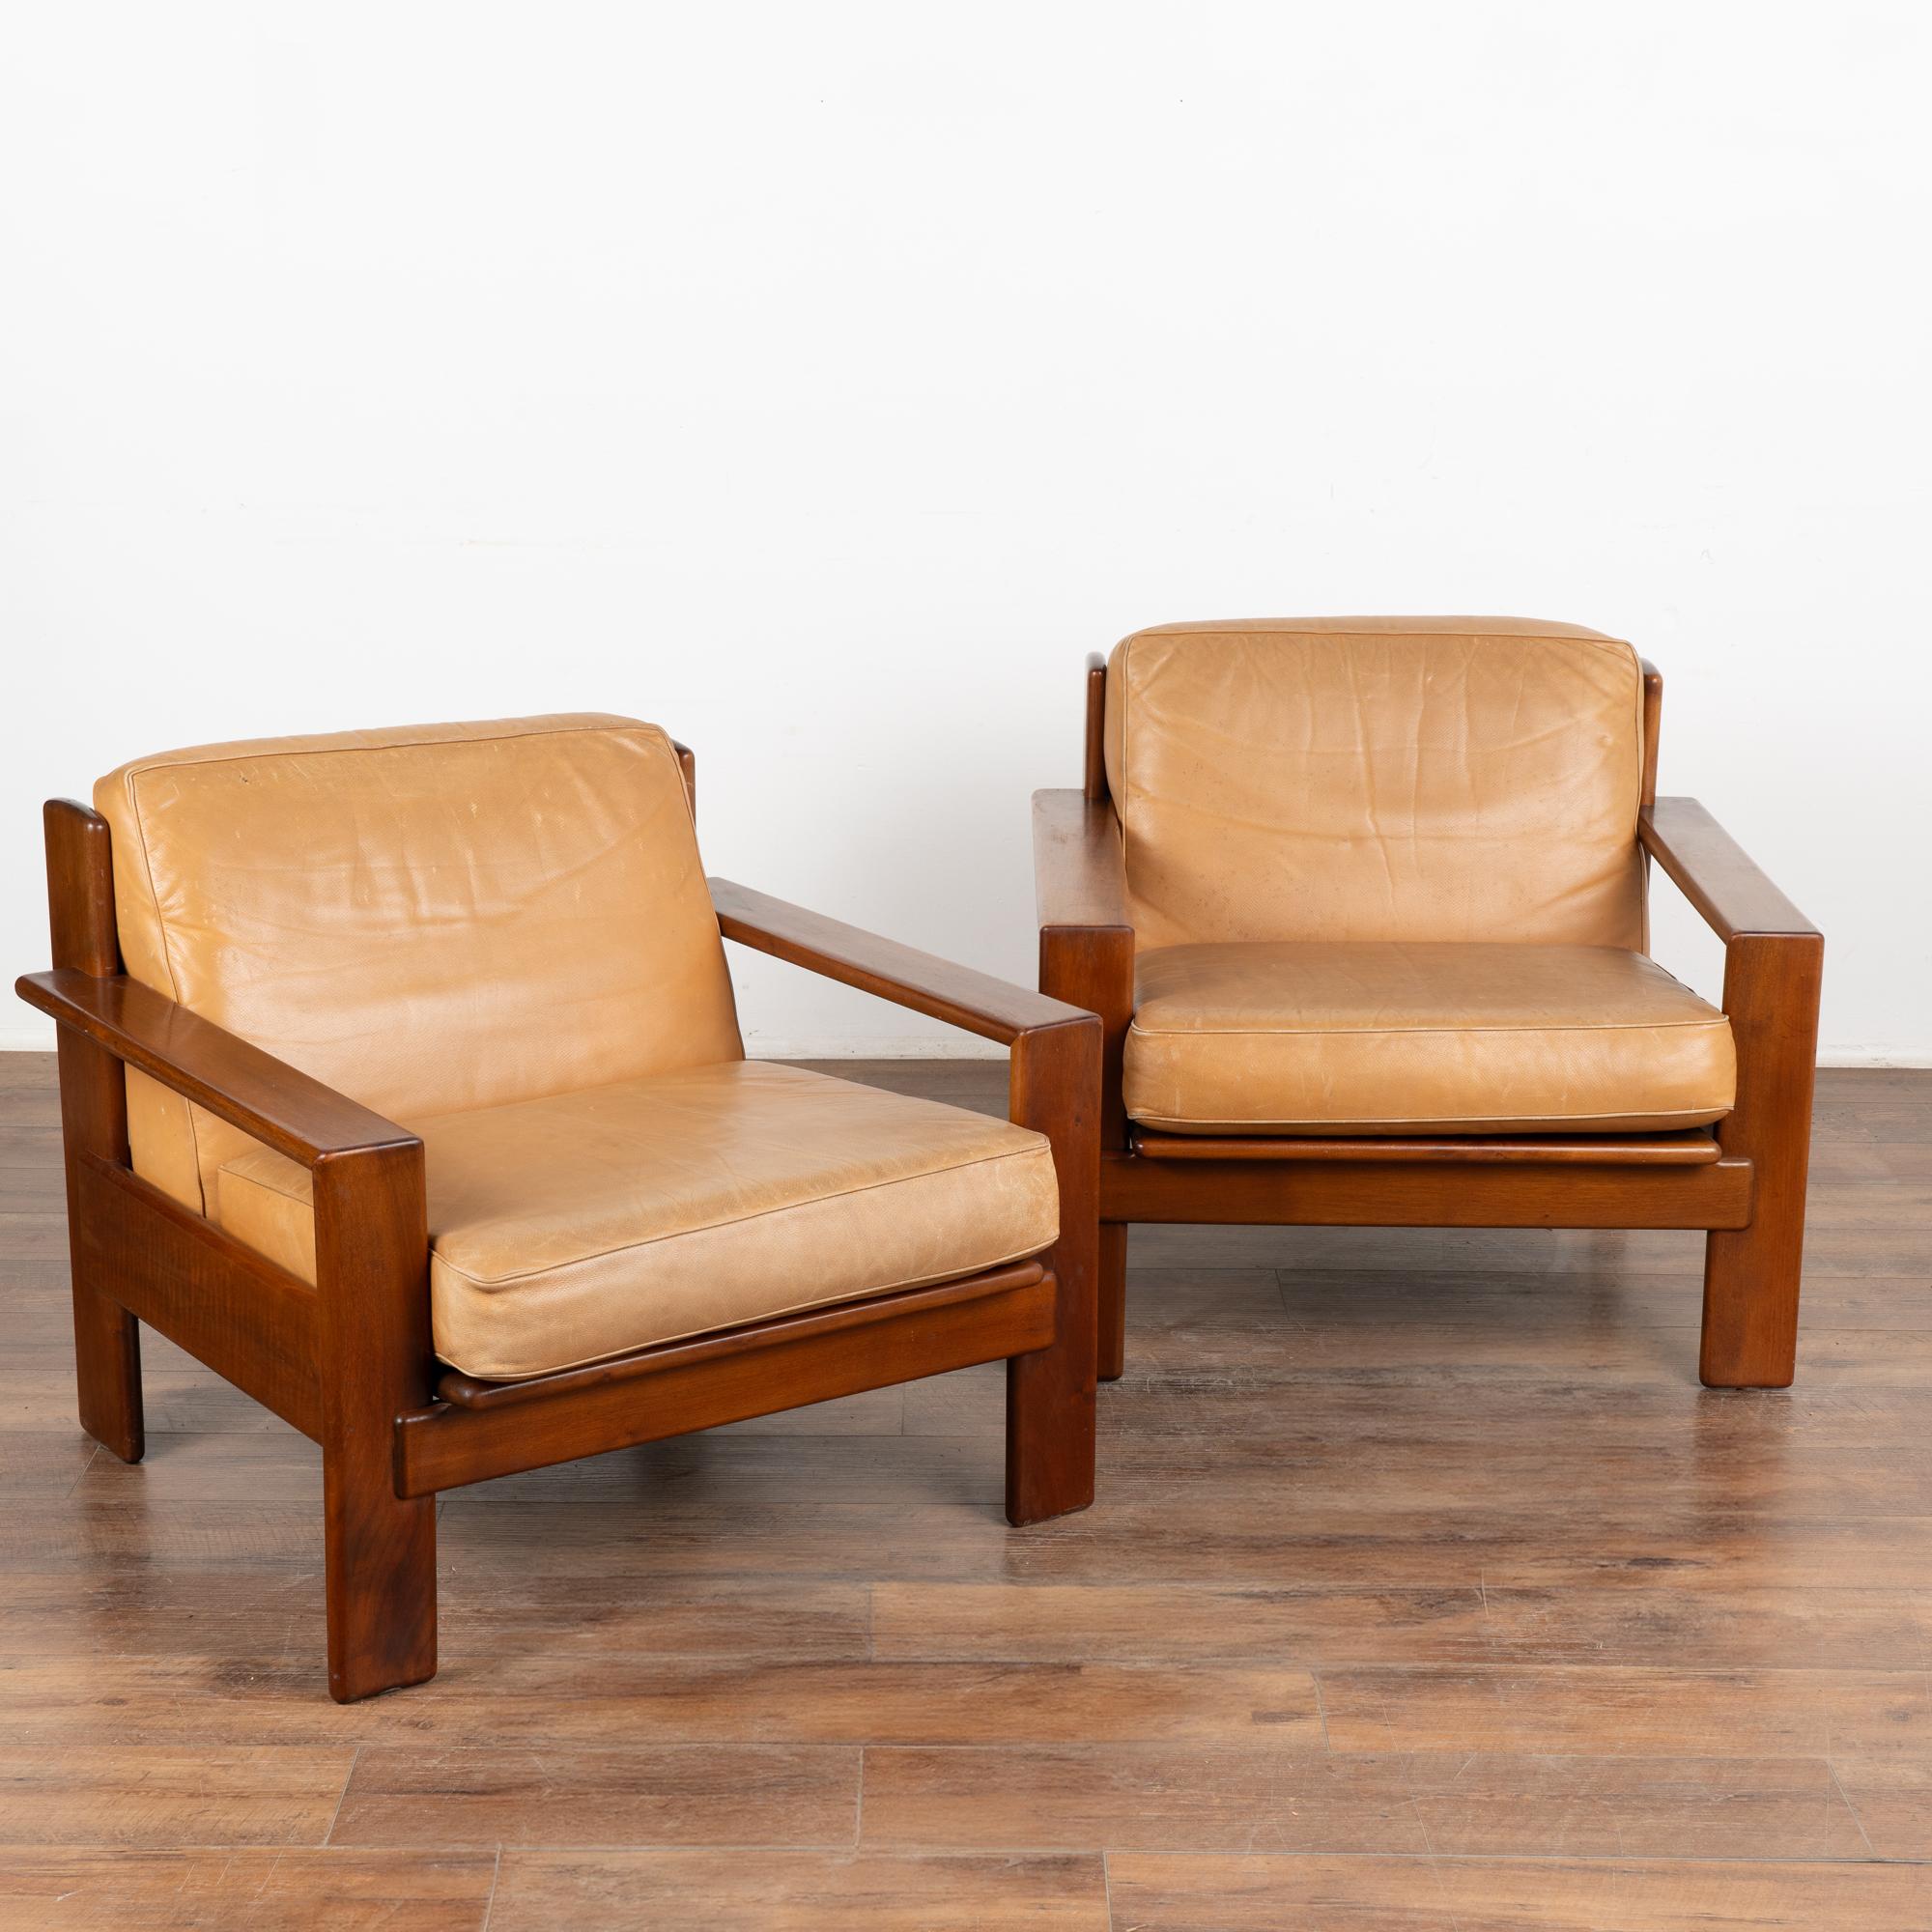 This pair of arm chairs show off the clean lines of mid-century craftsmanship and style. 
In good used condition, the original camel leather shows typical signs of age-related wear such as scuffs, scratches, stains, impressions to leather and minor